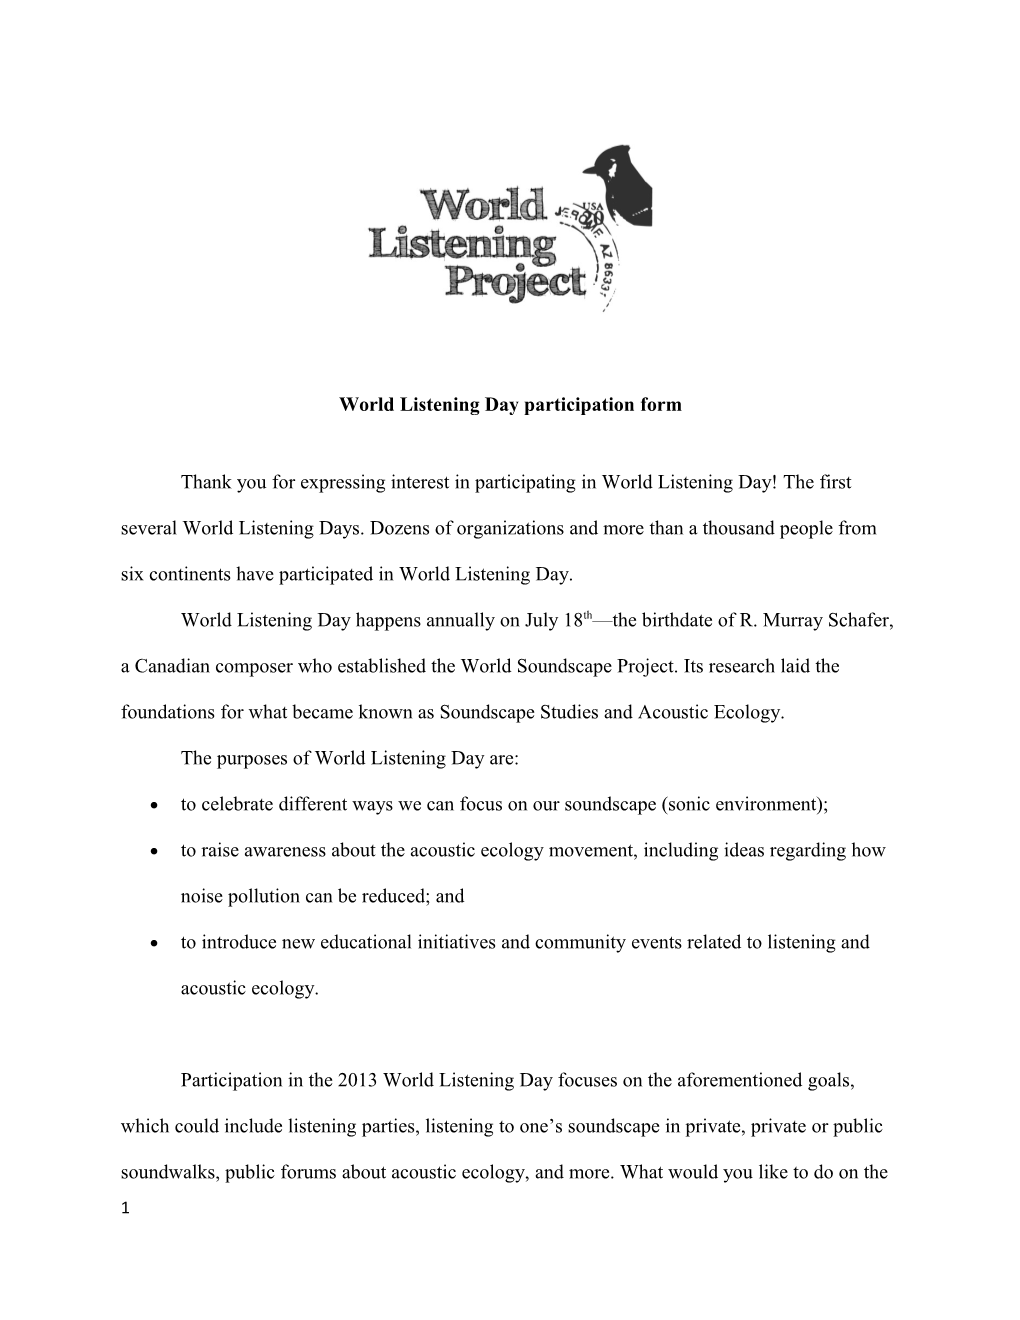 World Listening Day Participation Form